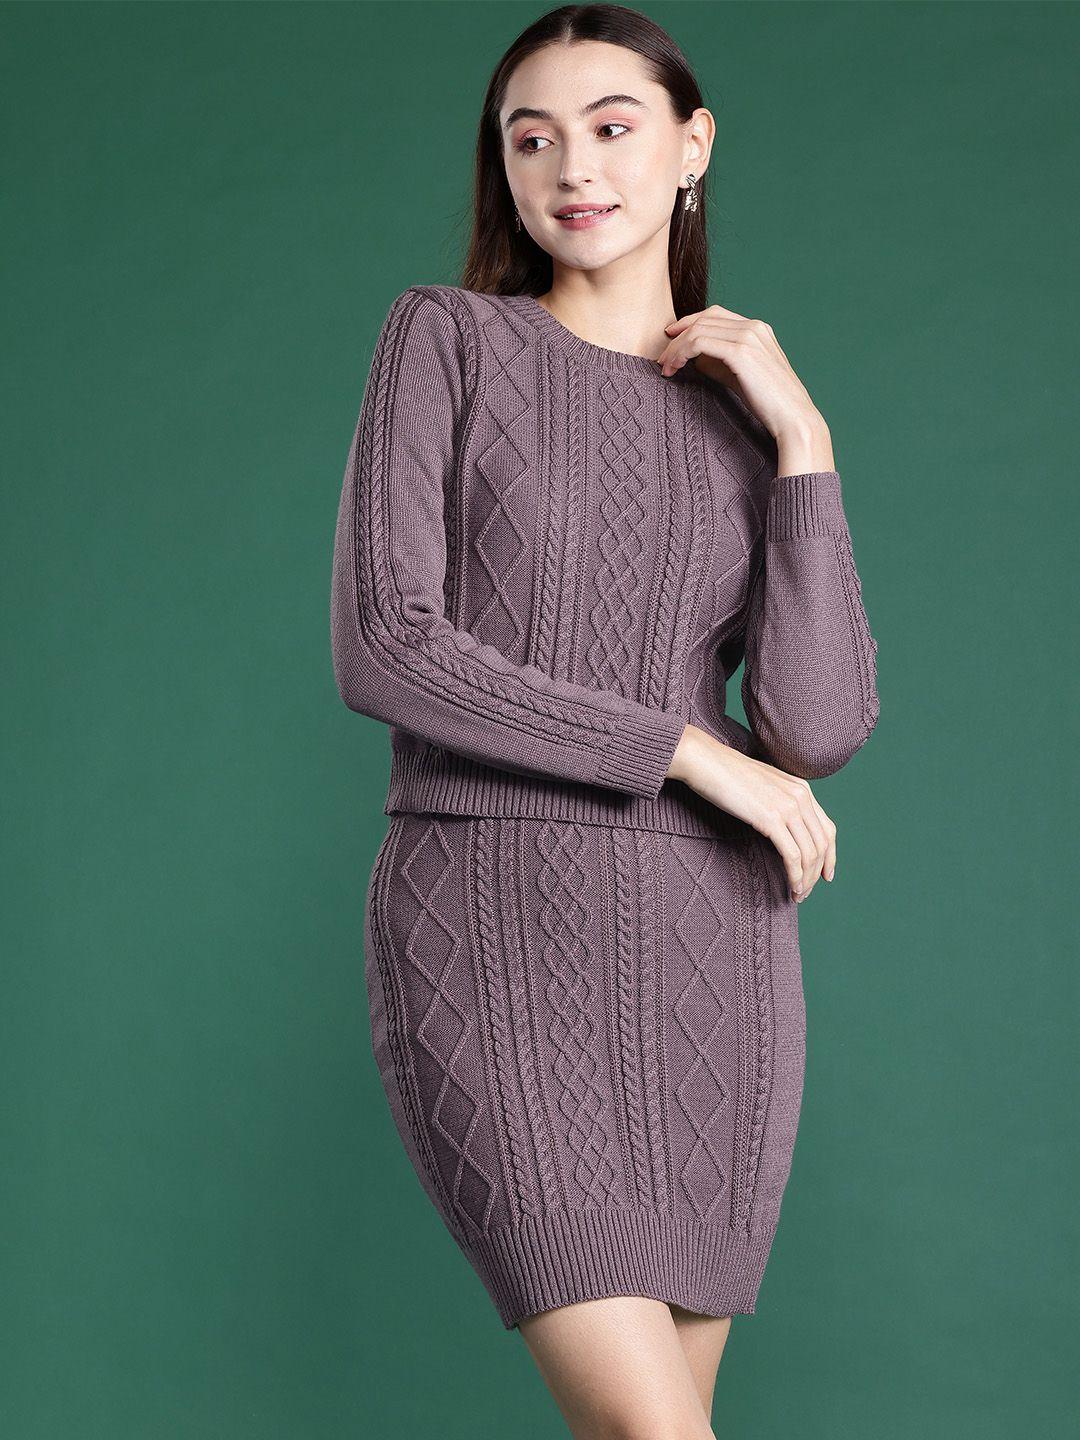 dressberry women cable knit acrylic winter co-ords